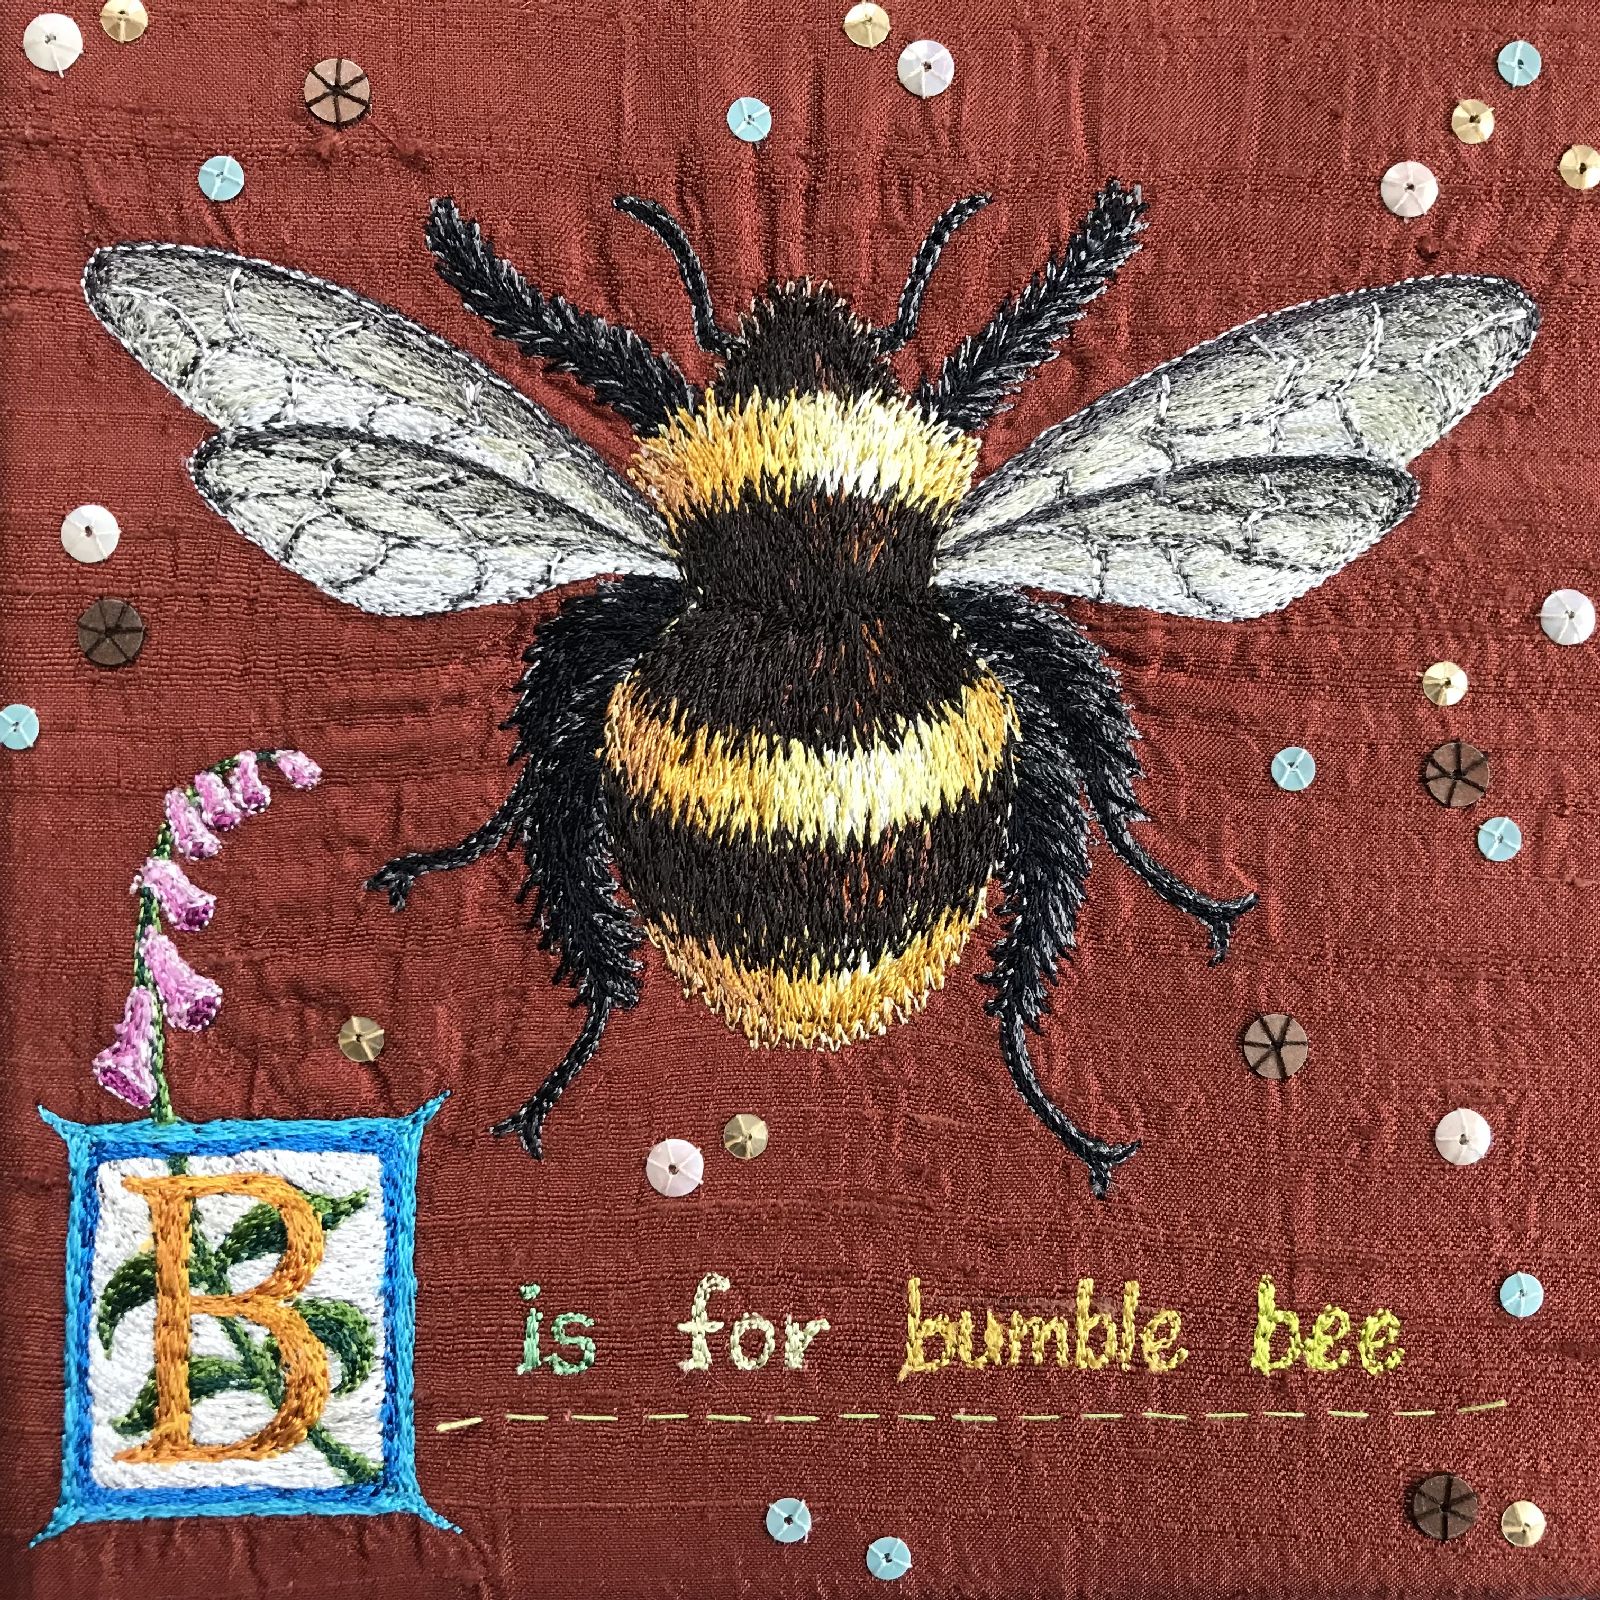 B is for Bumble Bee by Aileen  Johnston